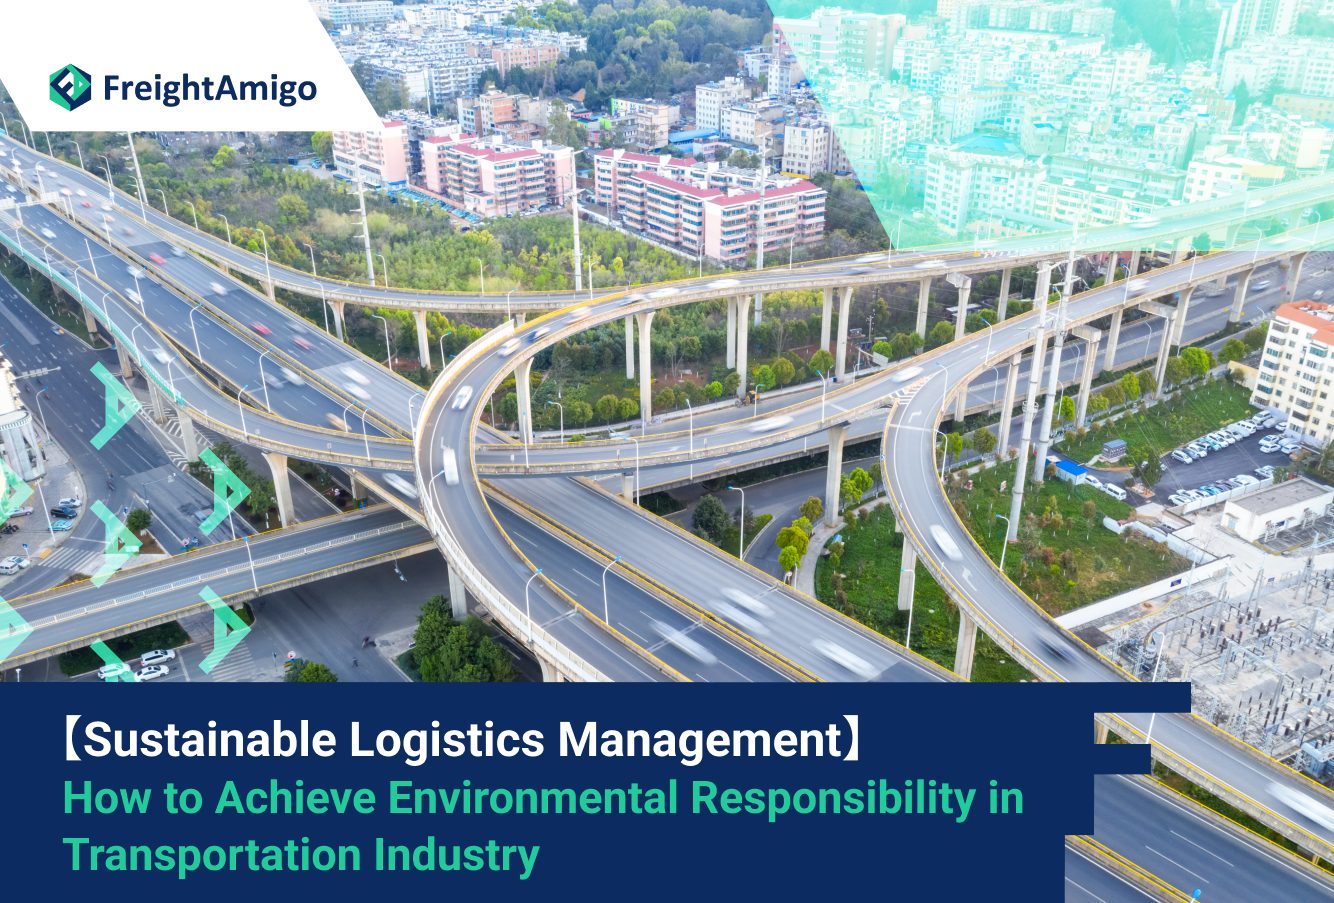 【Sustainable Logistics Management】 How to Achieve Environmental Responsibility in the Transportation Industry